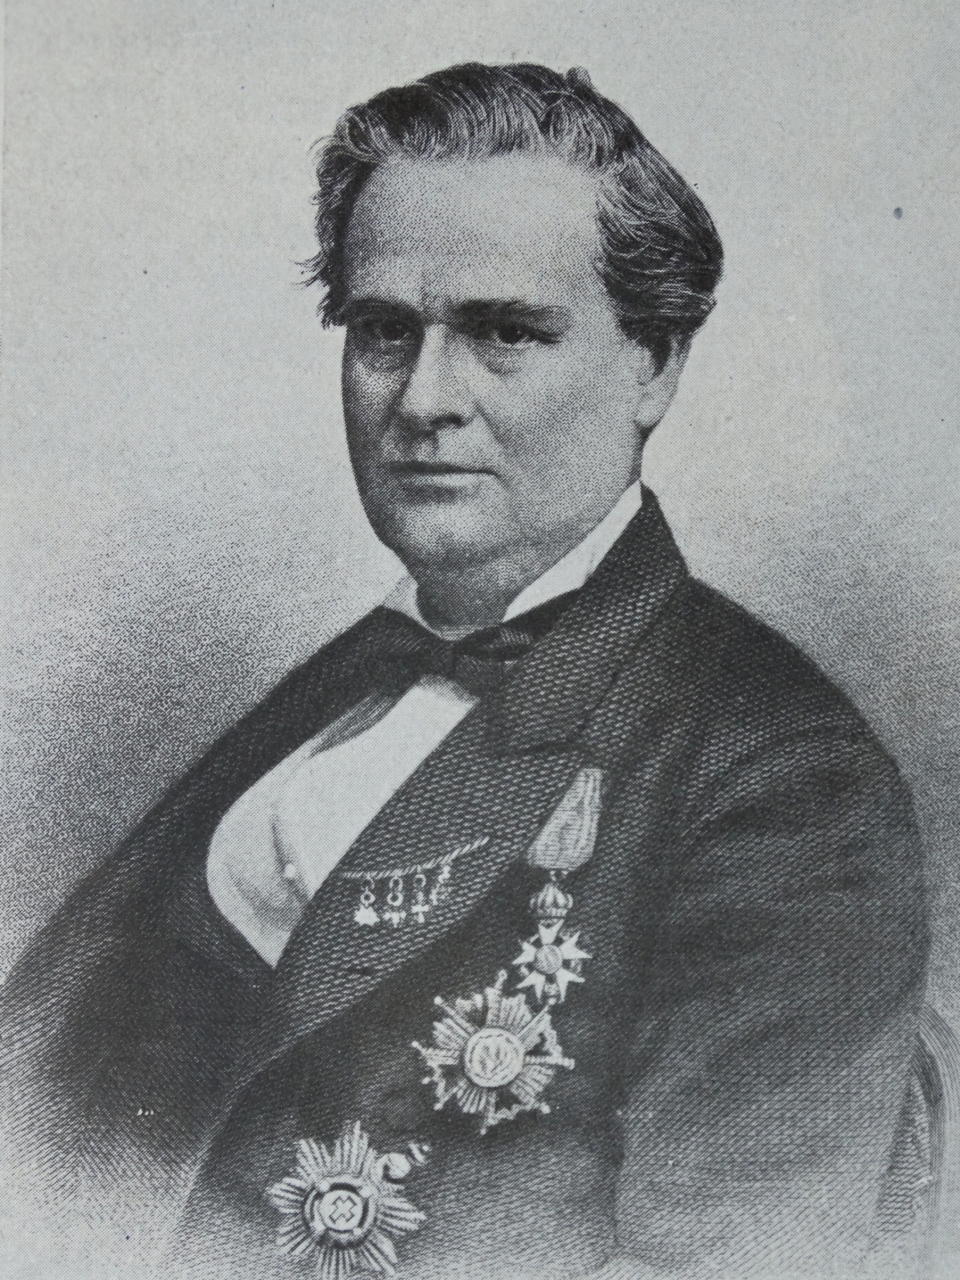 Portrait of J. Marion Sims, born James Marion Sims, a physician considered by some as the father of modern gynecology.